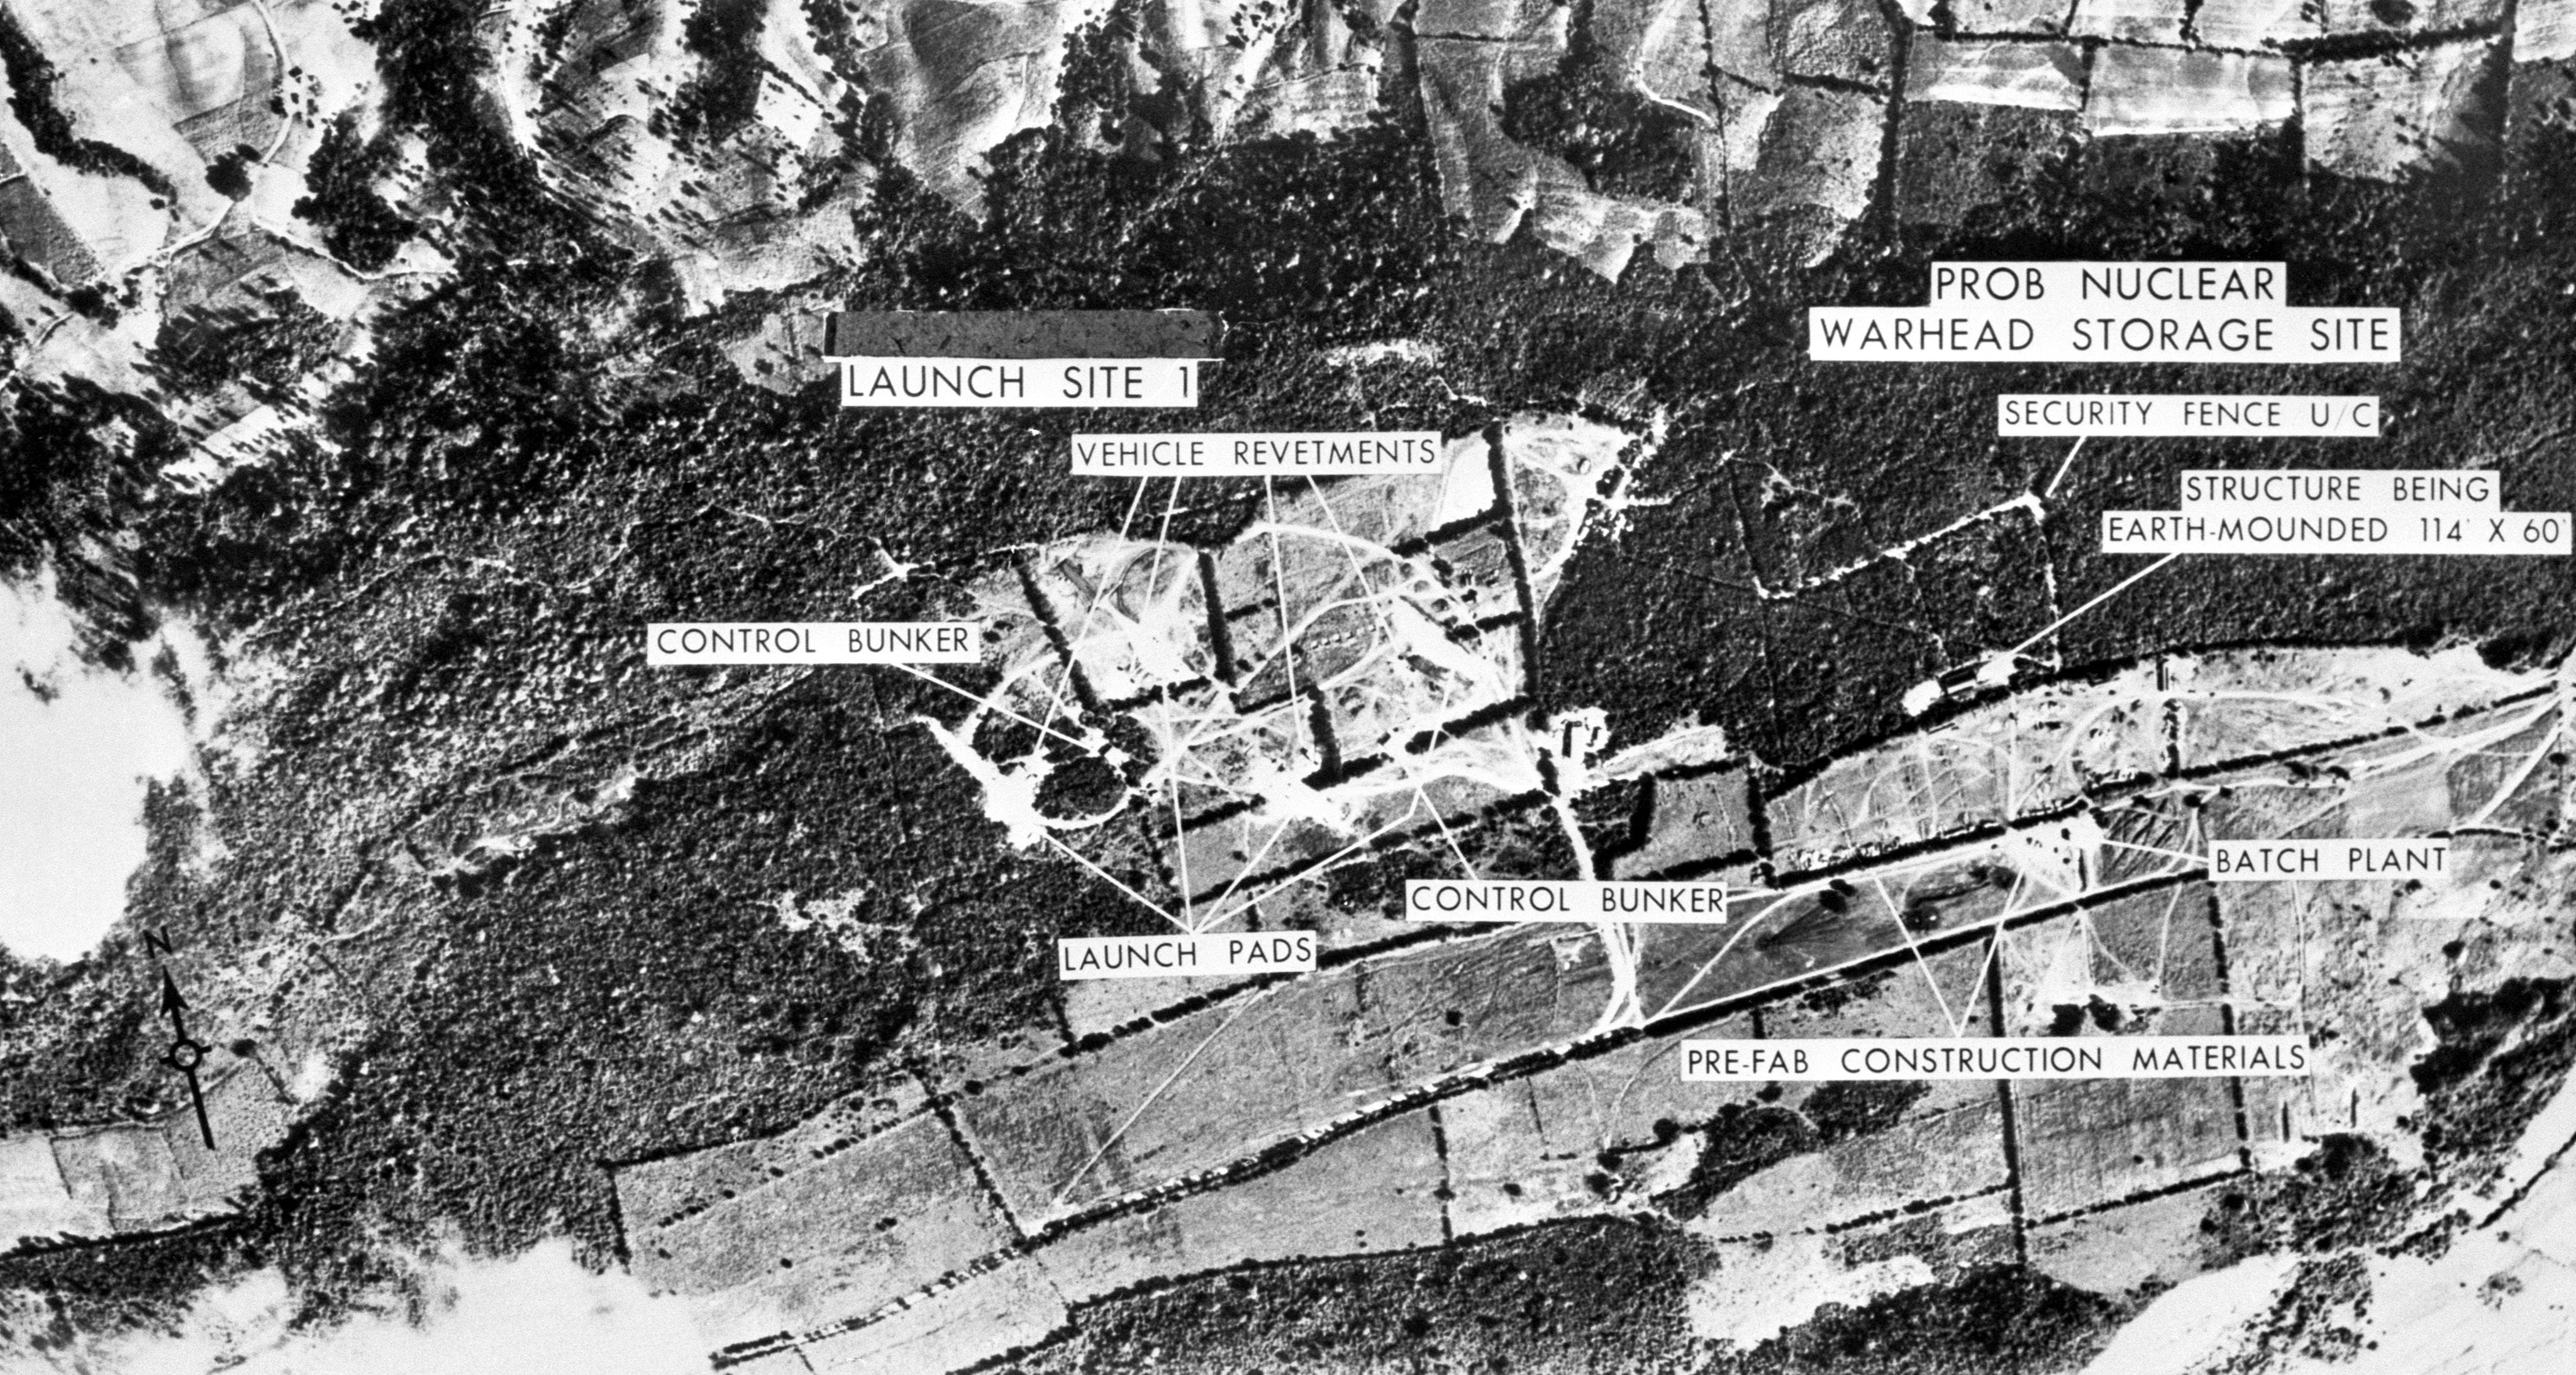 A picture issued by the US Embassy in London in 1962 was said to show ‘Intermediate ballistic missile site under construction in Cuba (PA)